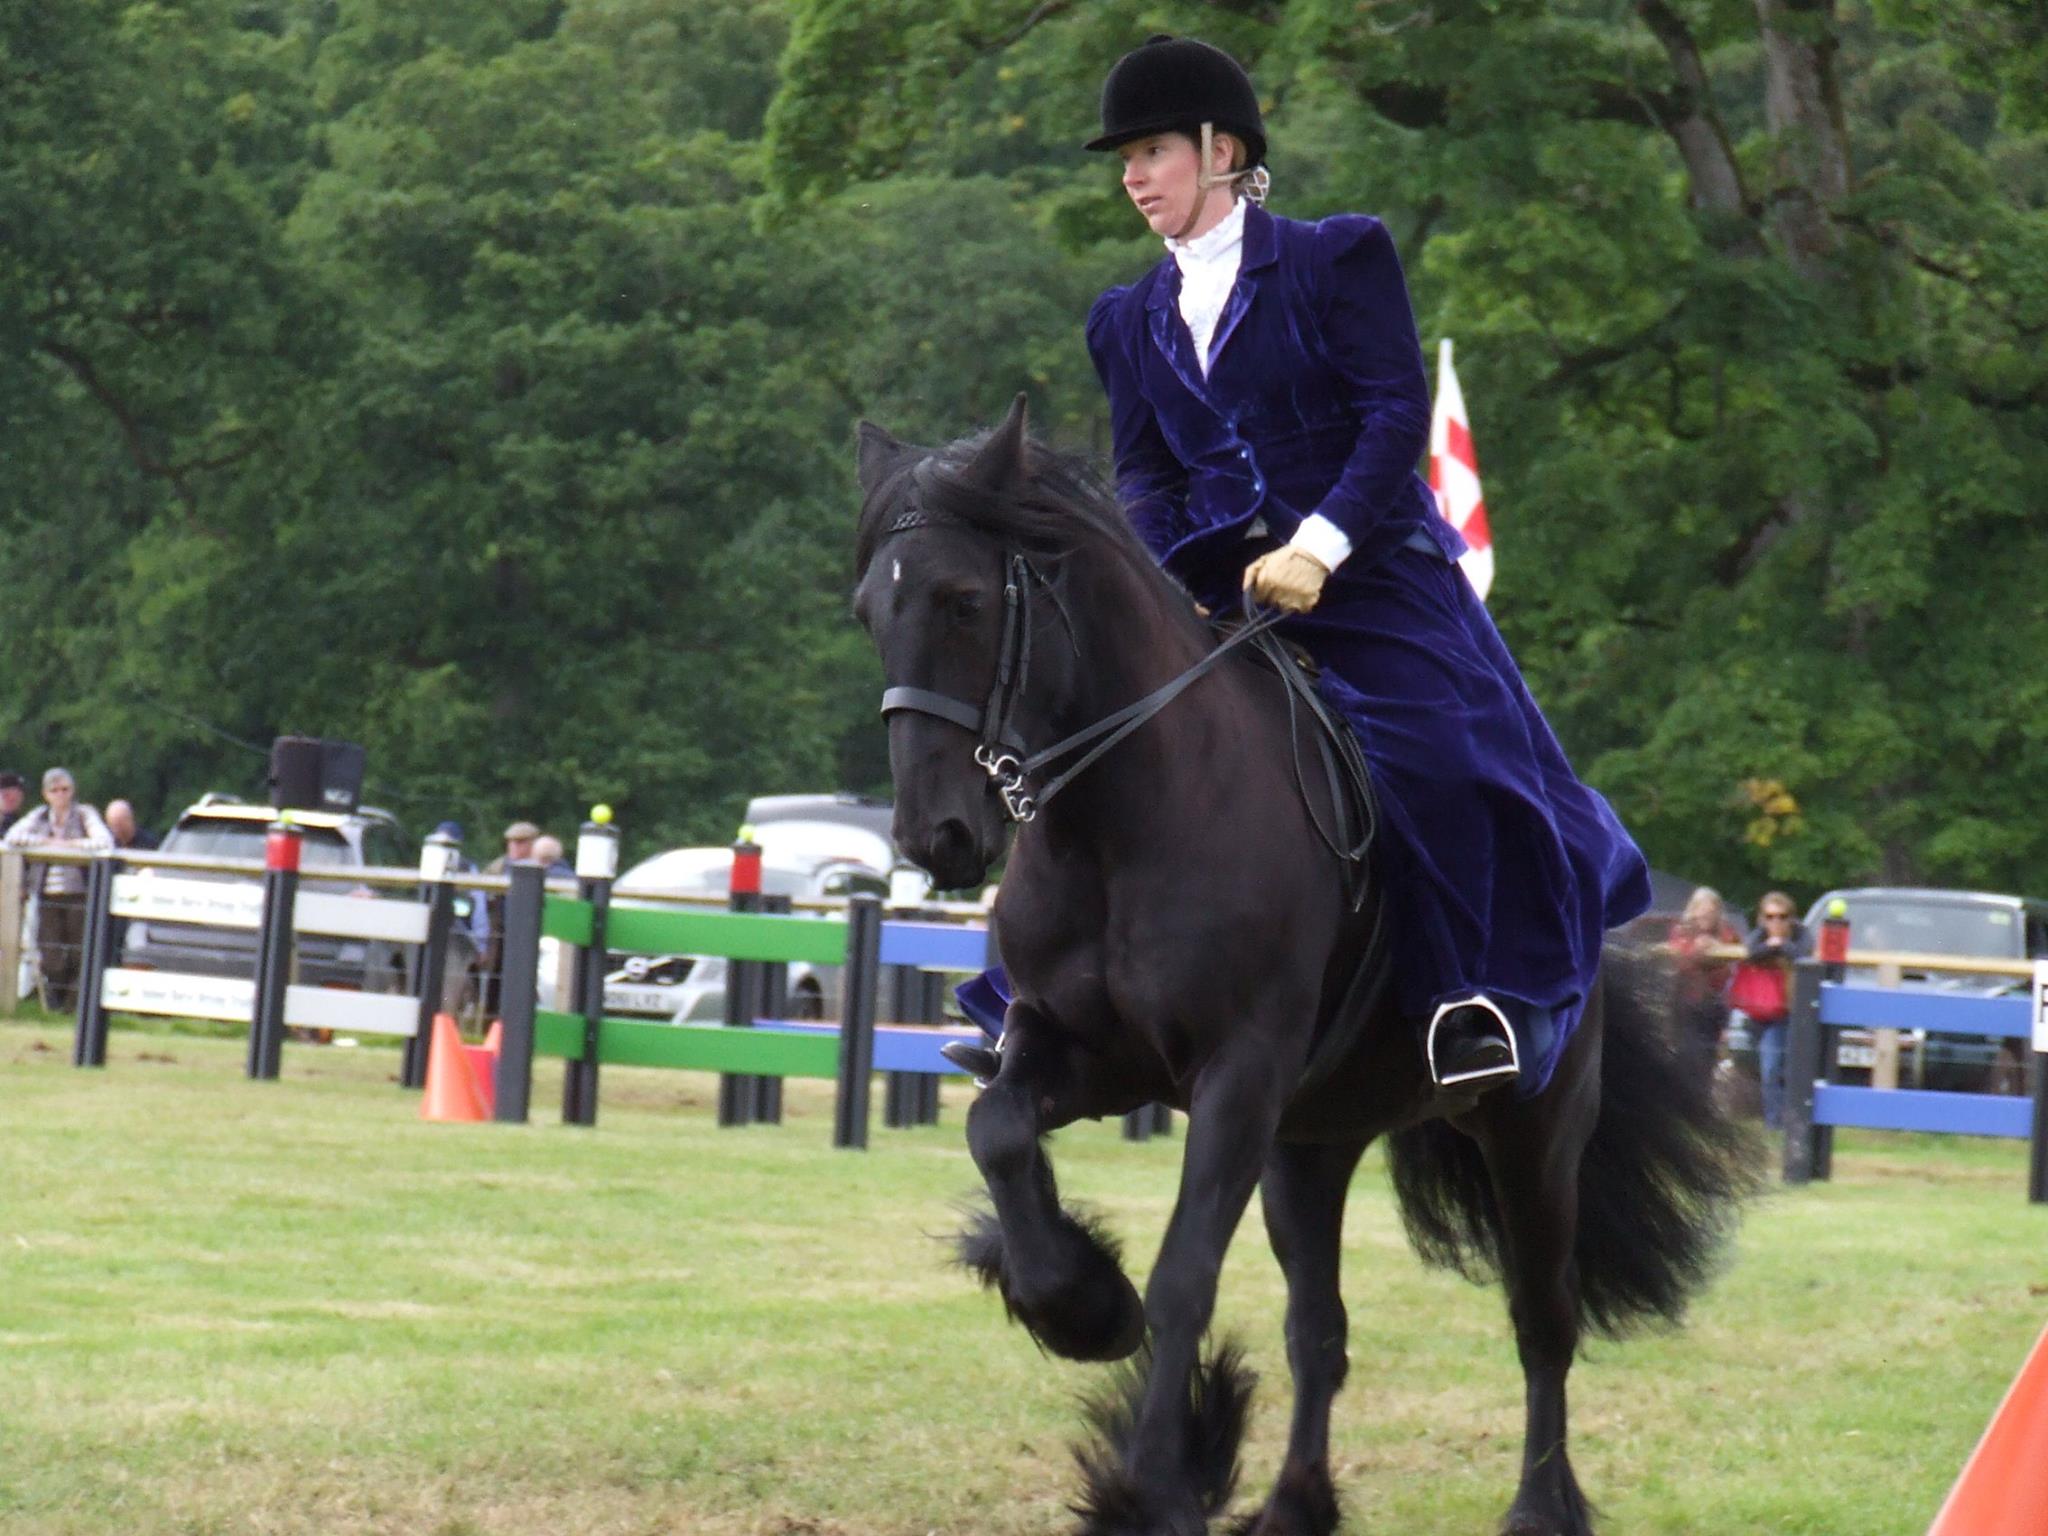 Cantering Fell pony and rider in costume